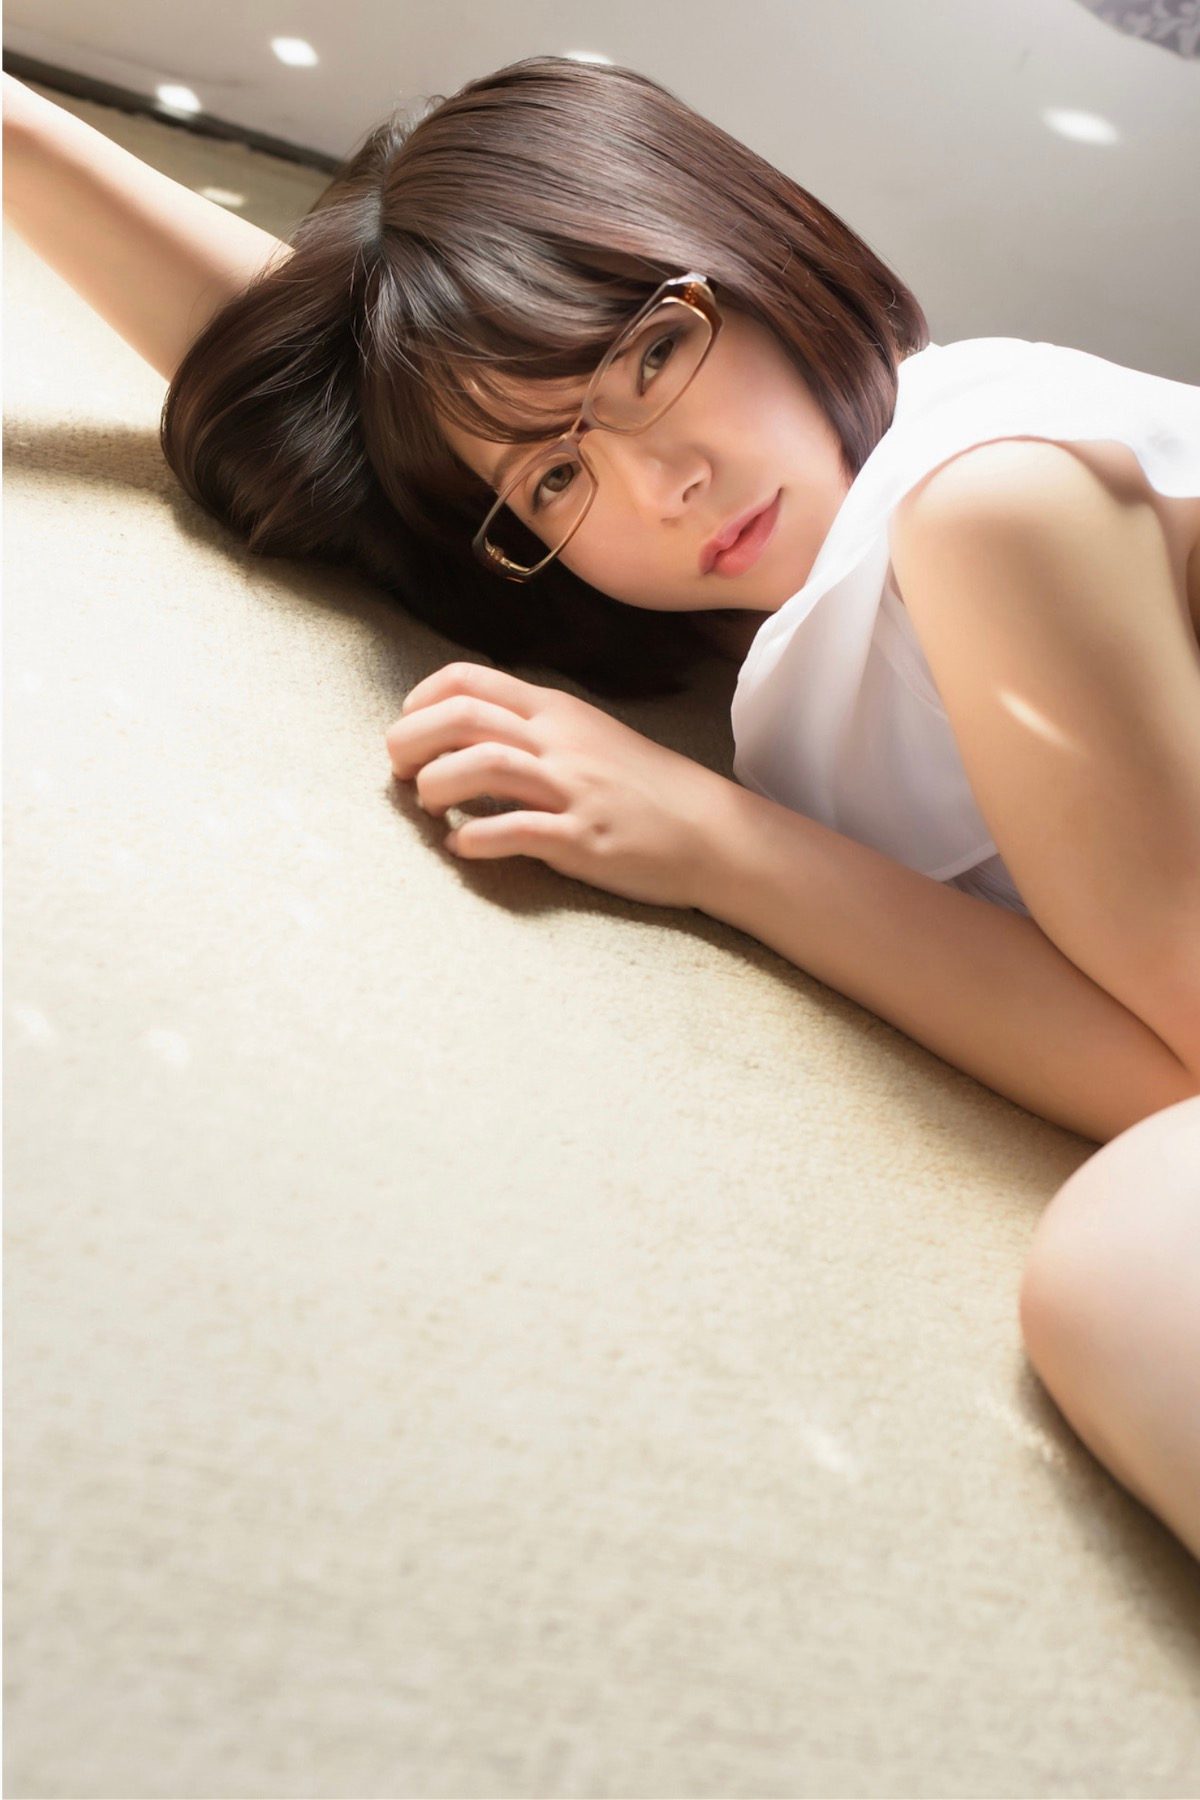 Gravure Photo Book Nenne 初愛ねんね Eye Difference 0035 4863363271.jpg